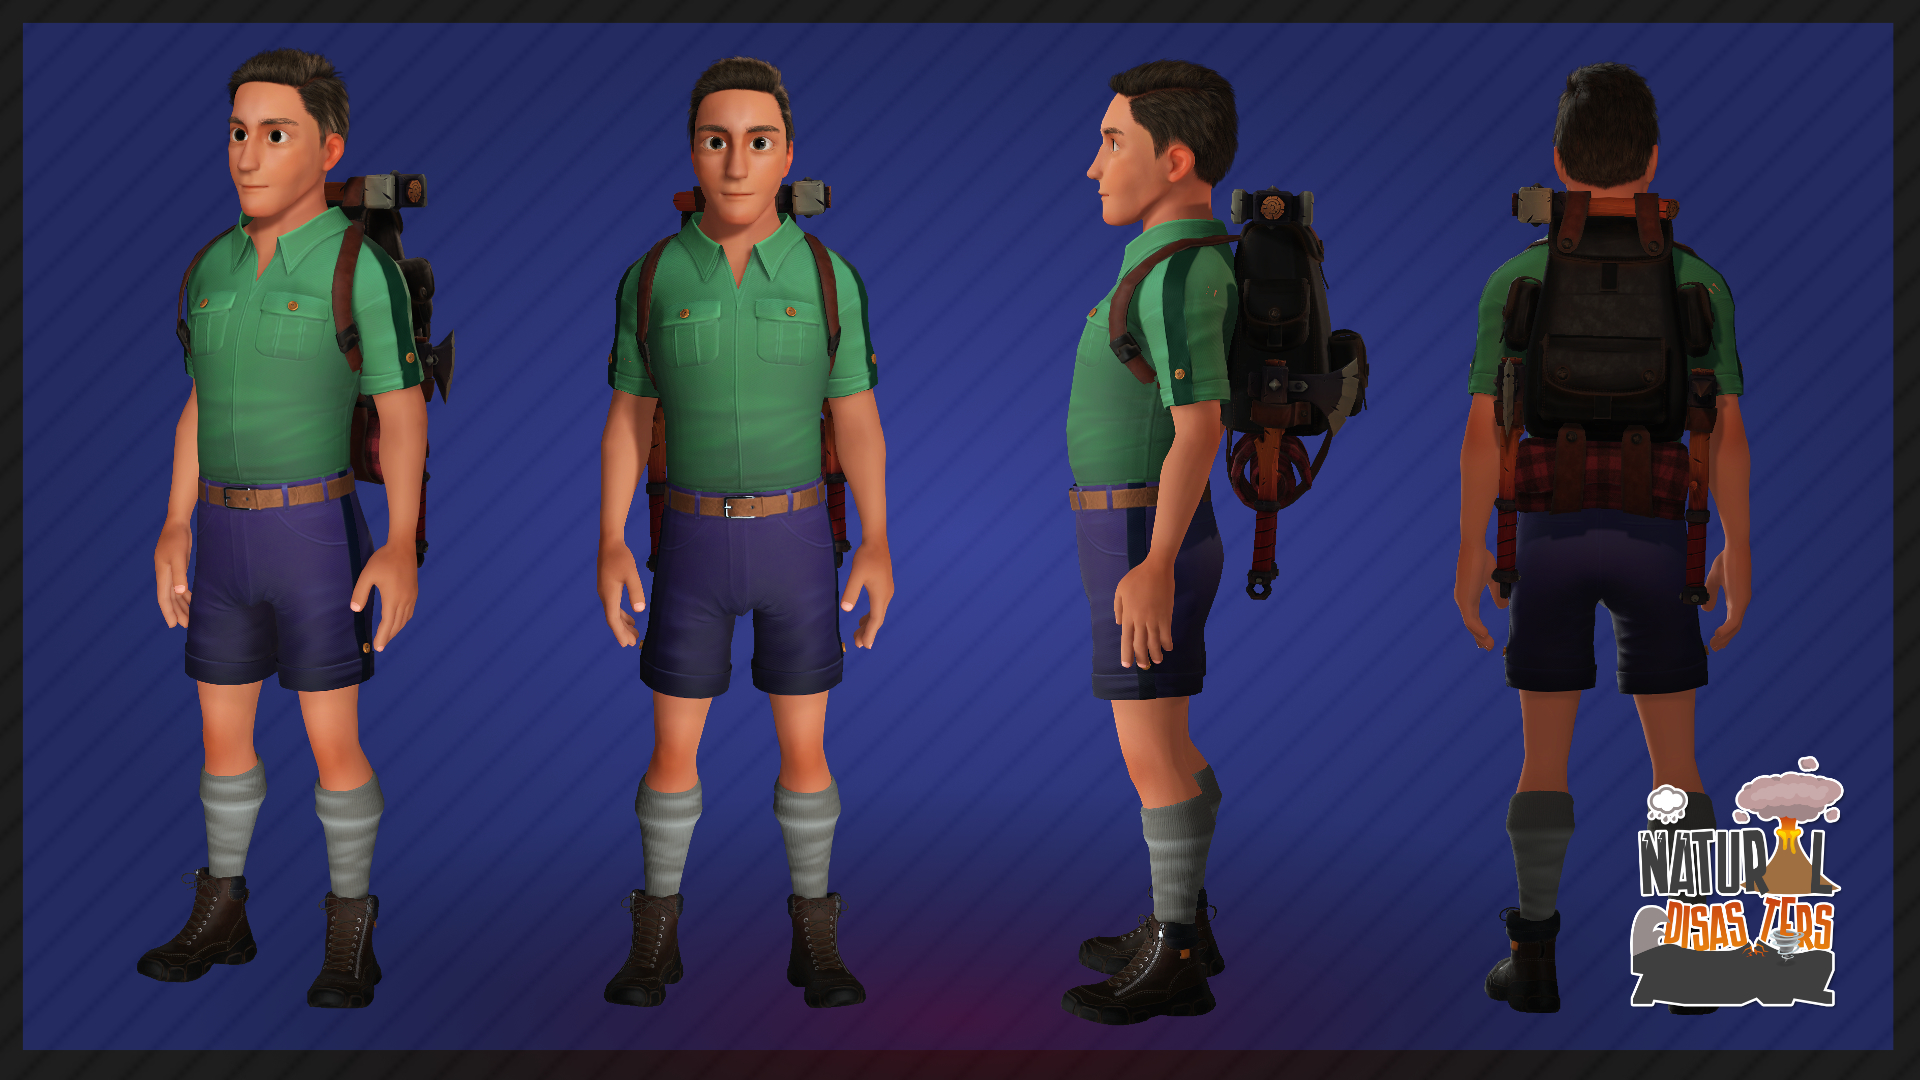 New main 3d stylized backpacker character for the Natural Disasters Game!